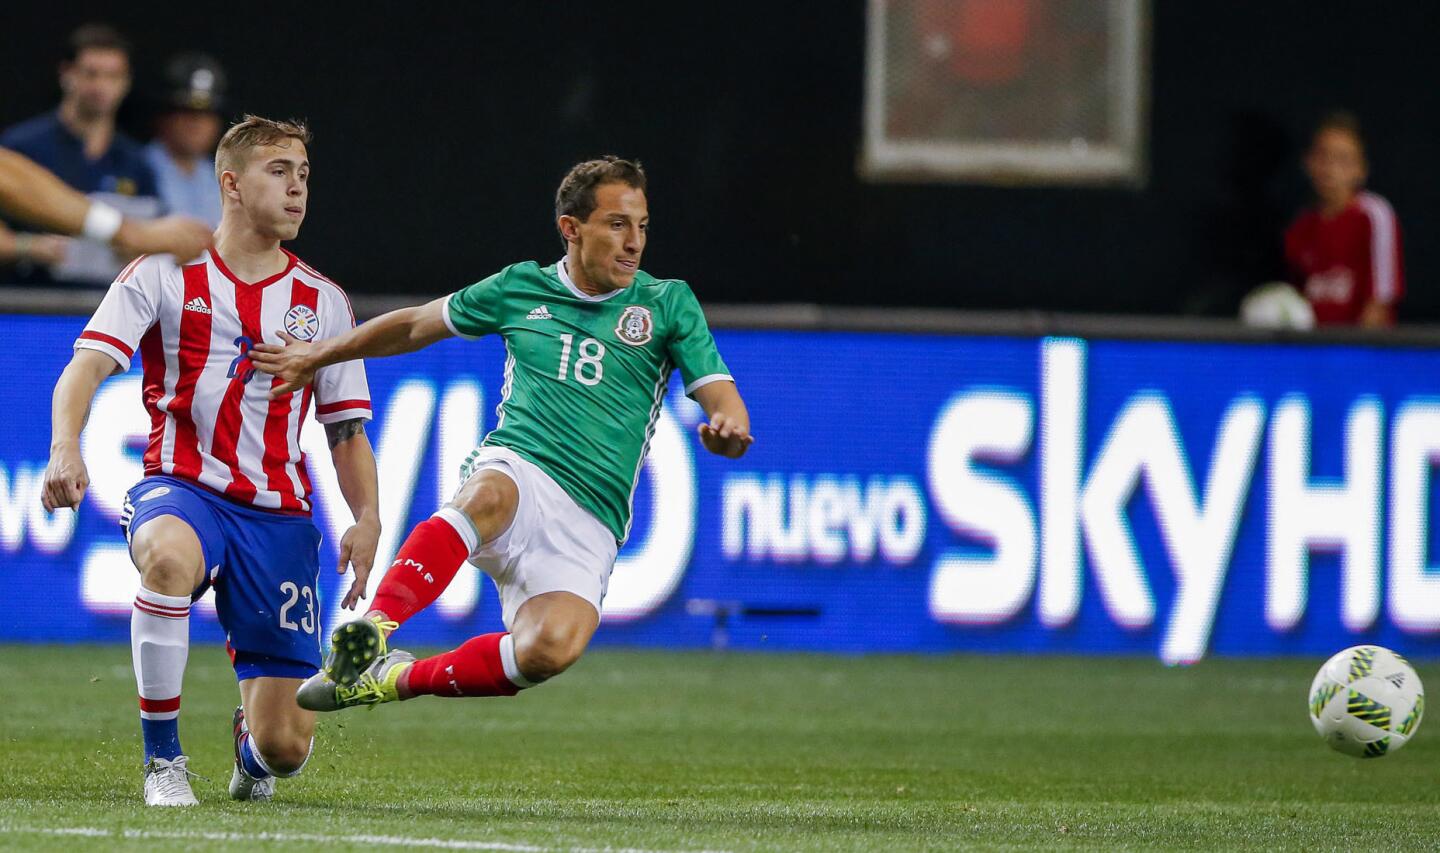 Mexico midfielder Andres Guardado (R) in action against Paraguay midfielder Robert Piris Da Motta (L) during the international friendly match between Mexico and Paraguay at the Georgia Dome in Atlanta, Georgia USA, 28 May 2016.